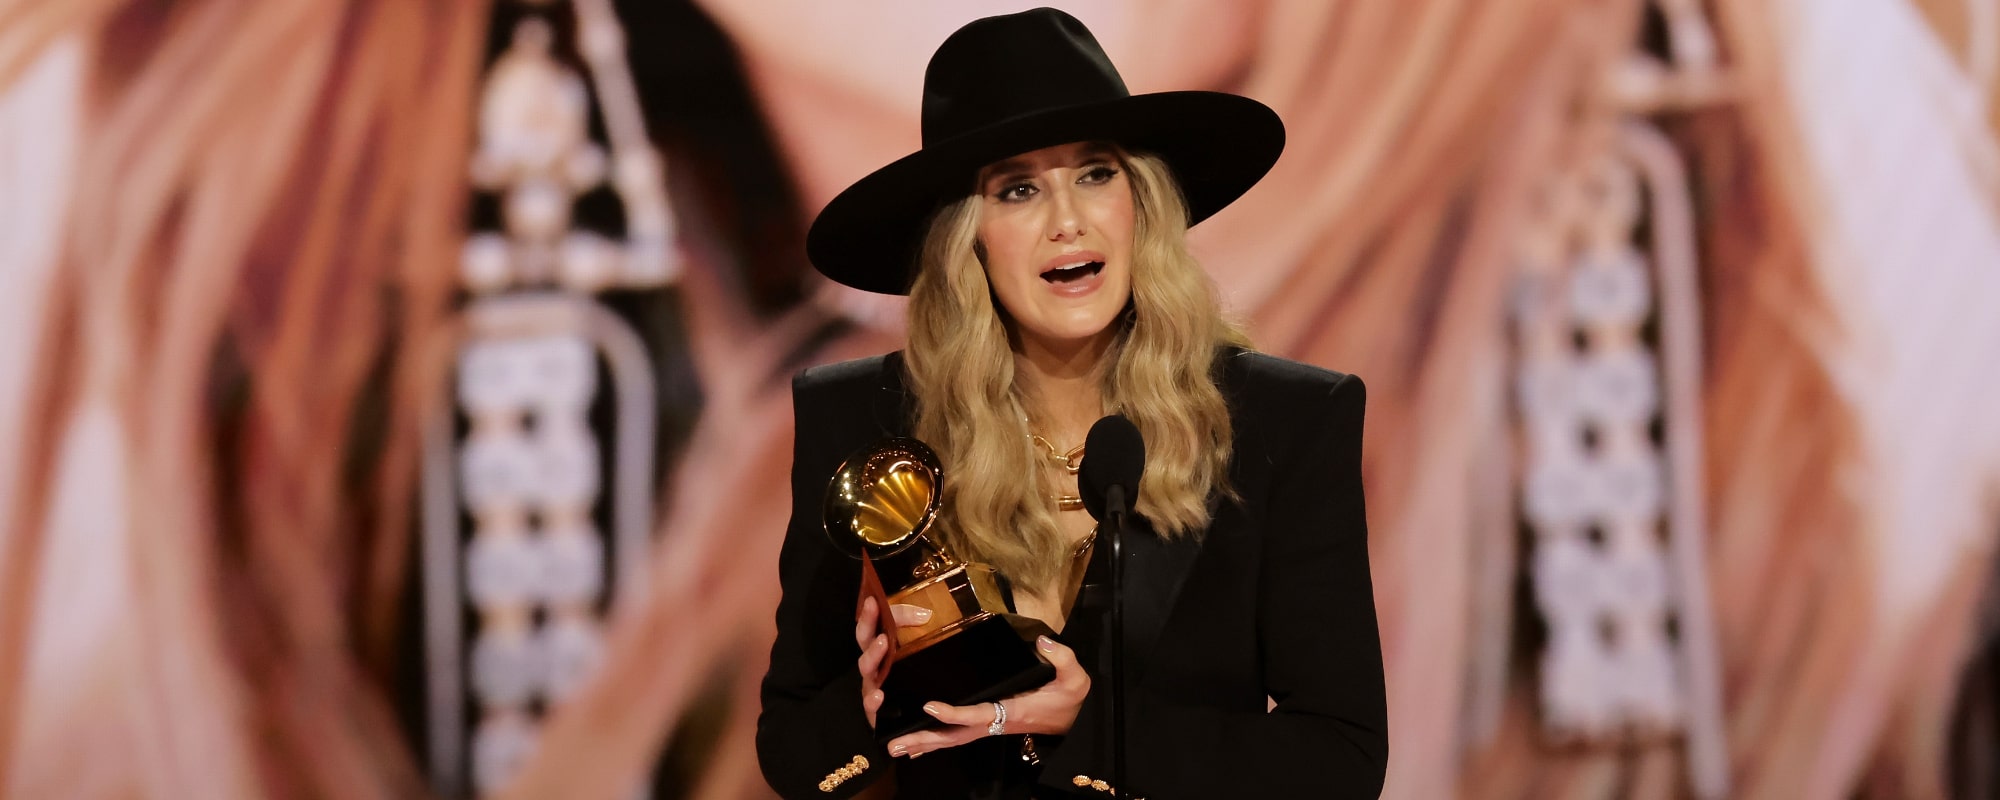 Lainey Wilson’s Ex-NFL Boyfriend Is “So Stinking Proud” Over Her First GRAMMY Win, Shares Photo From Special Night